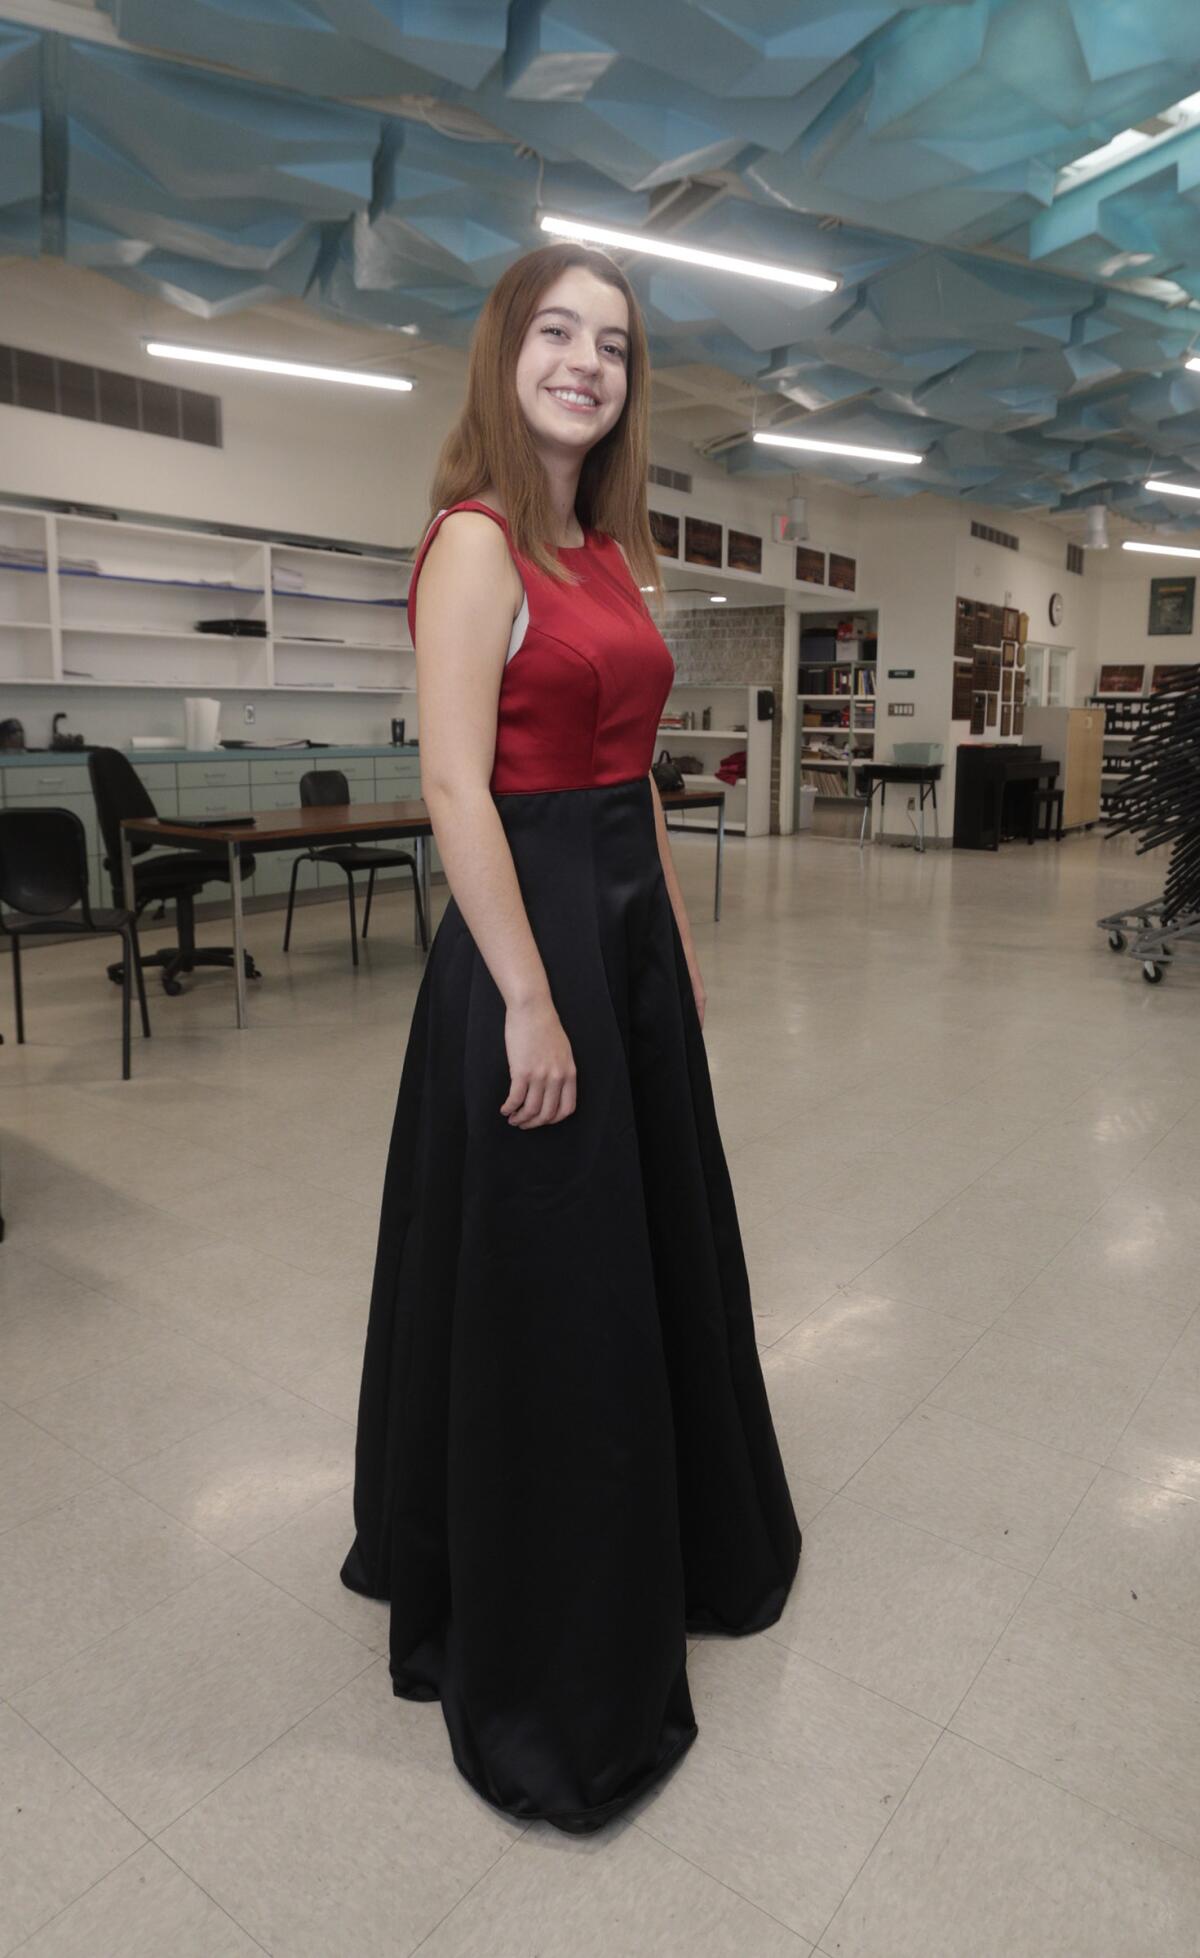 Maya Morgan, 18, who has been in the choir for six years, models a new gown for the La Cañada High School Choral program at LCHS on Friday, February 7, 2020.